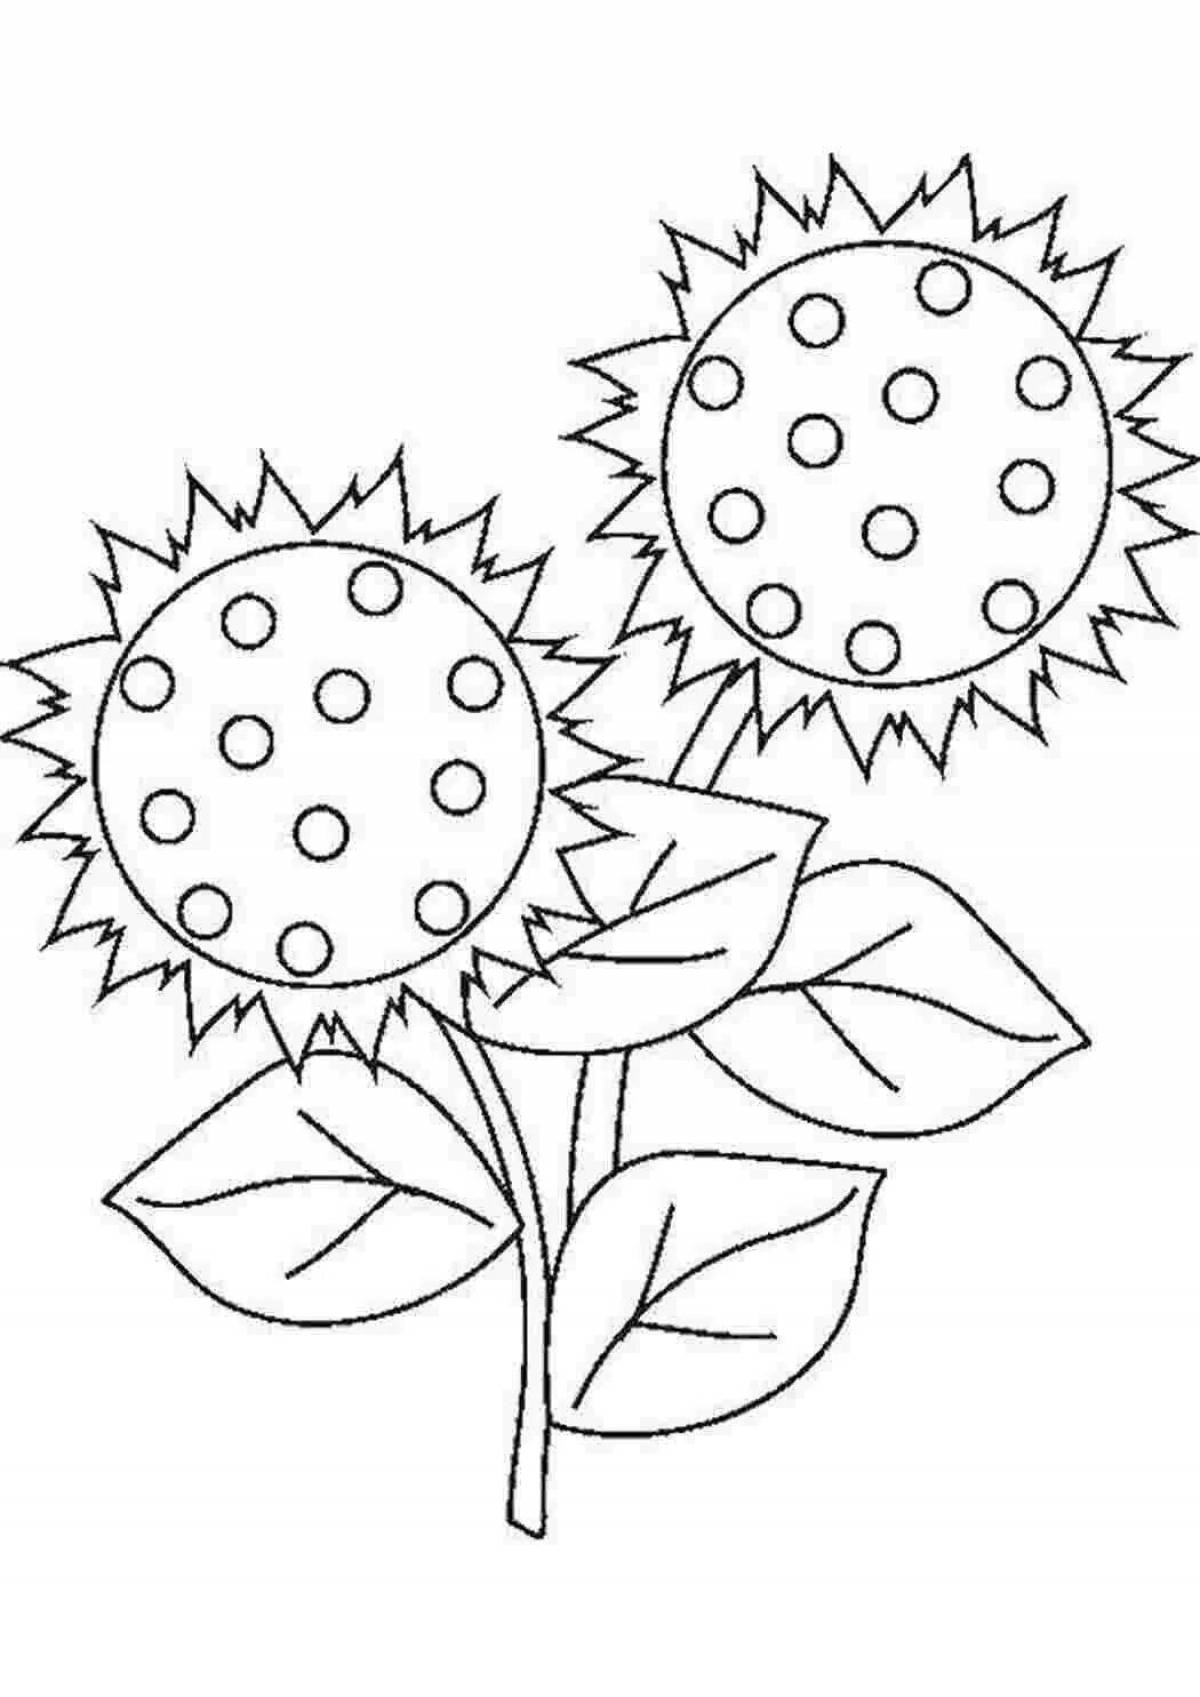 A spectacular sunflower coloring book for children 2-3 years old